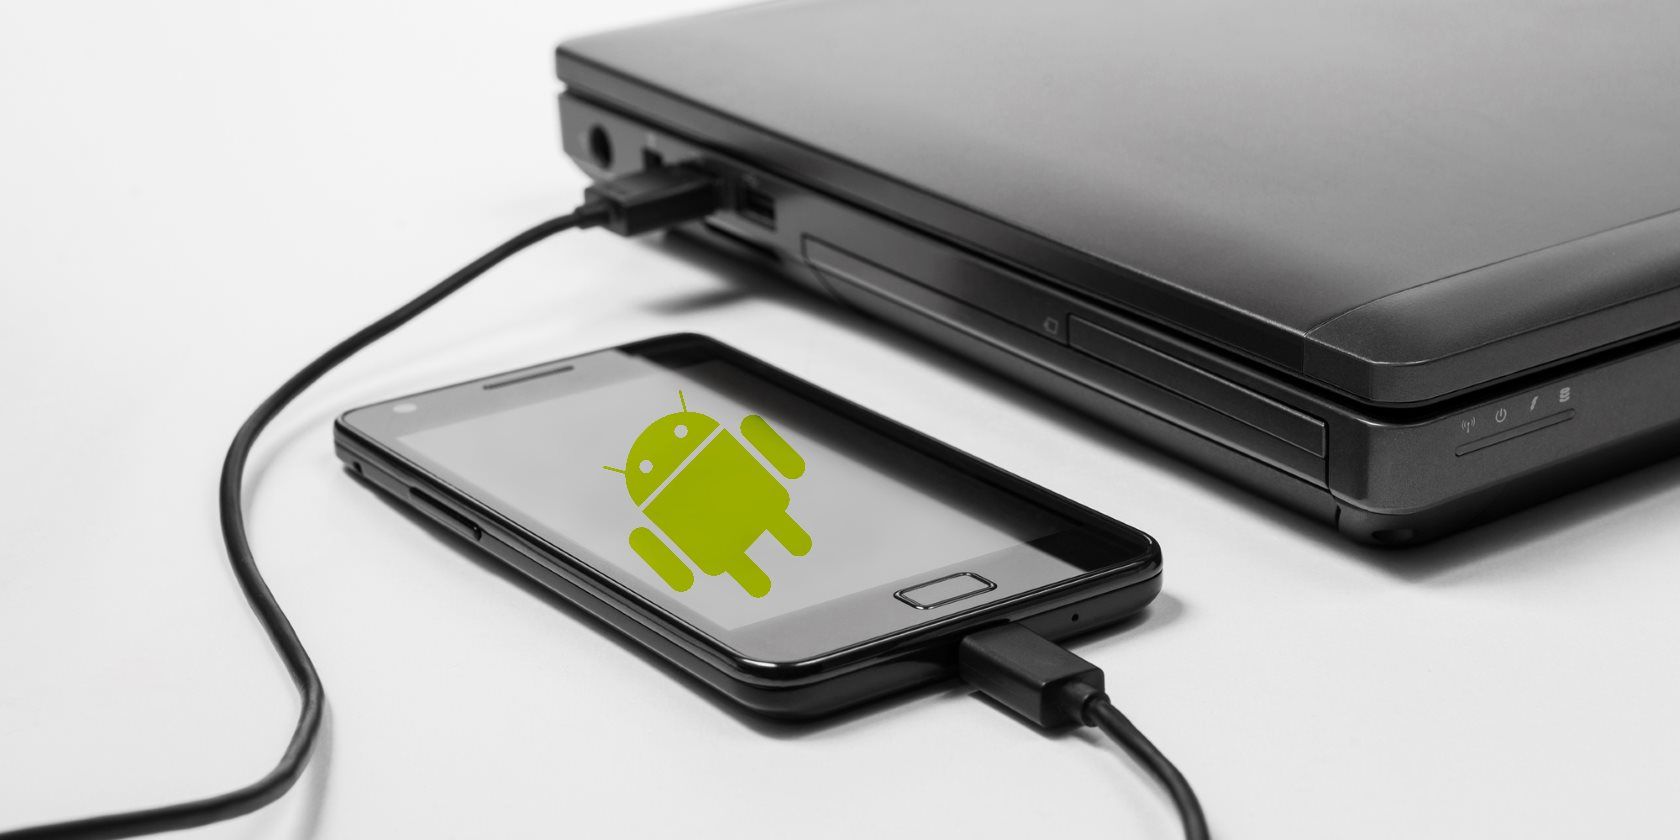 What Is Usb Debugging Mode On Android, How To Mirror Phone Laptop Without Usb Debugging